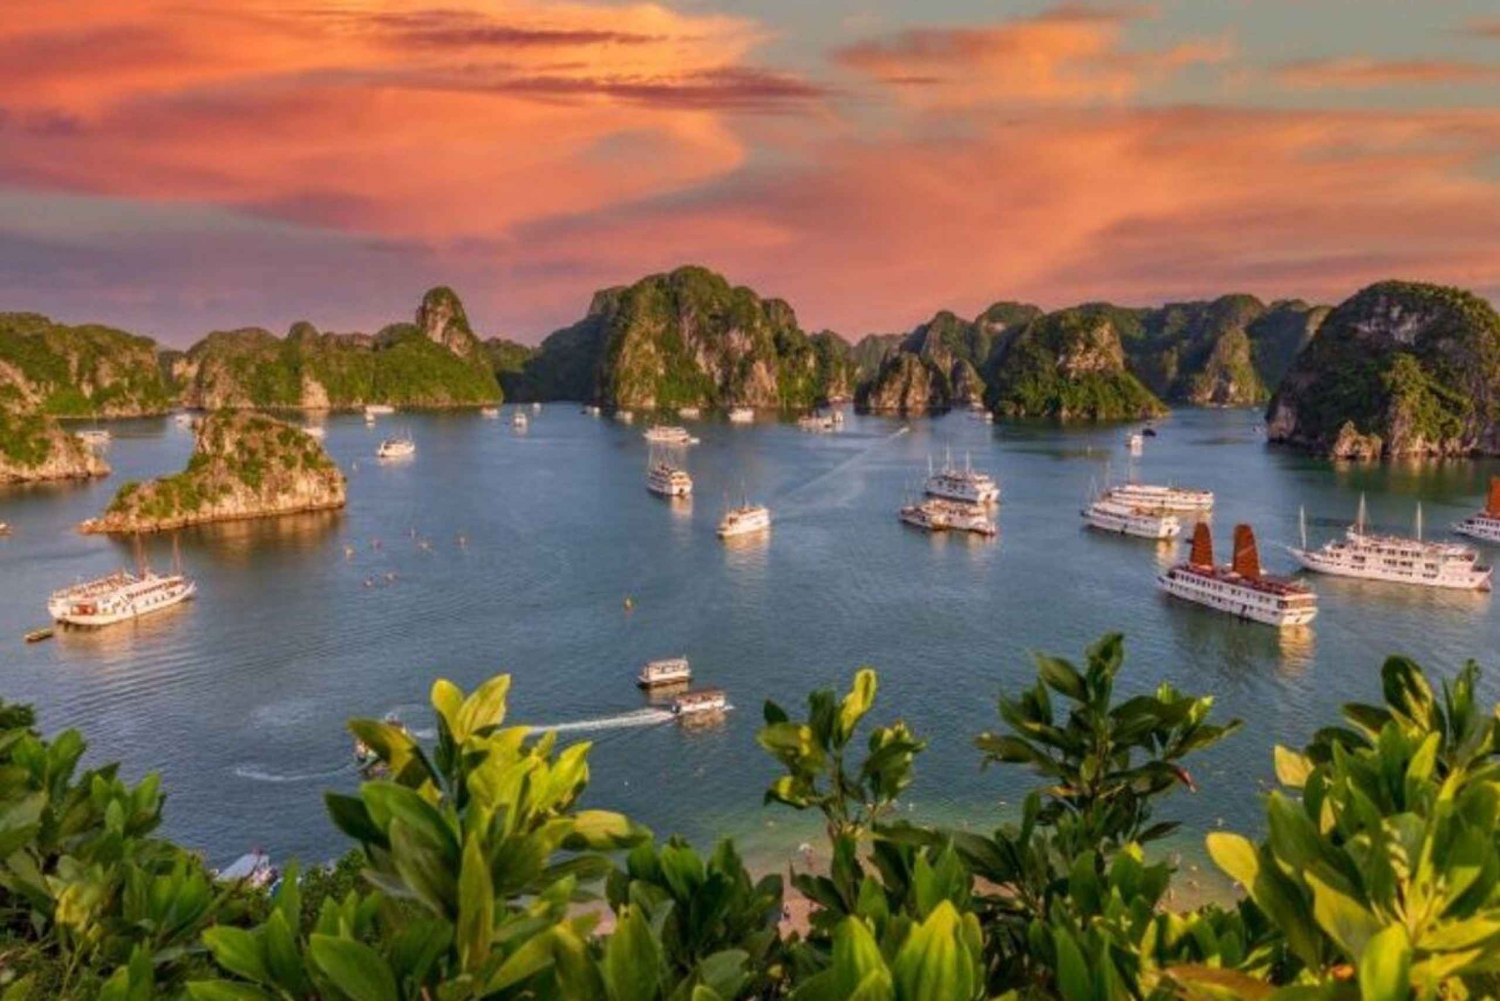 From Hanoi: Halong Bay, Titop Island, Sung Sot & Luon Caves